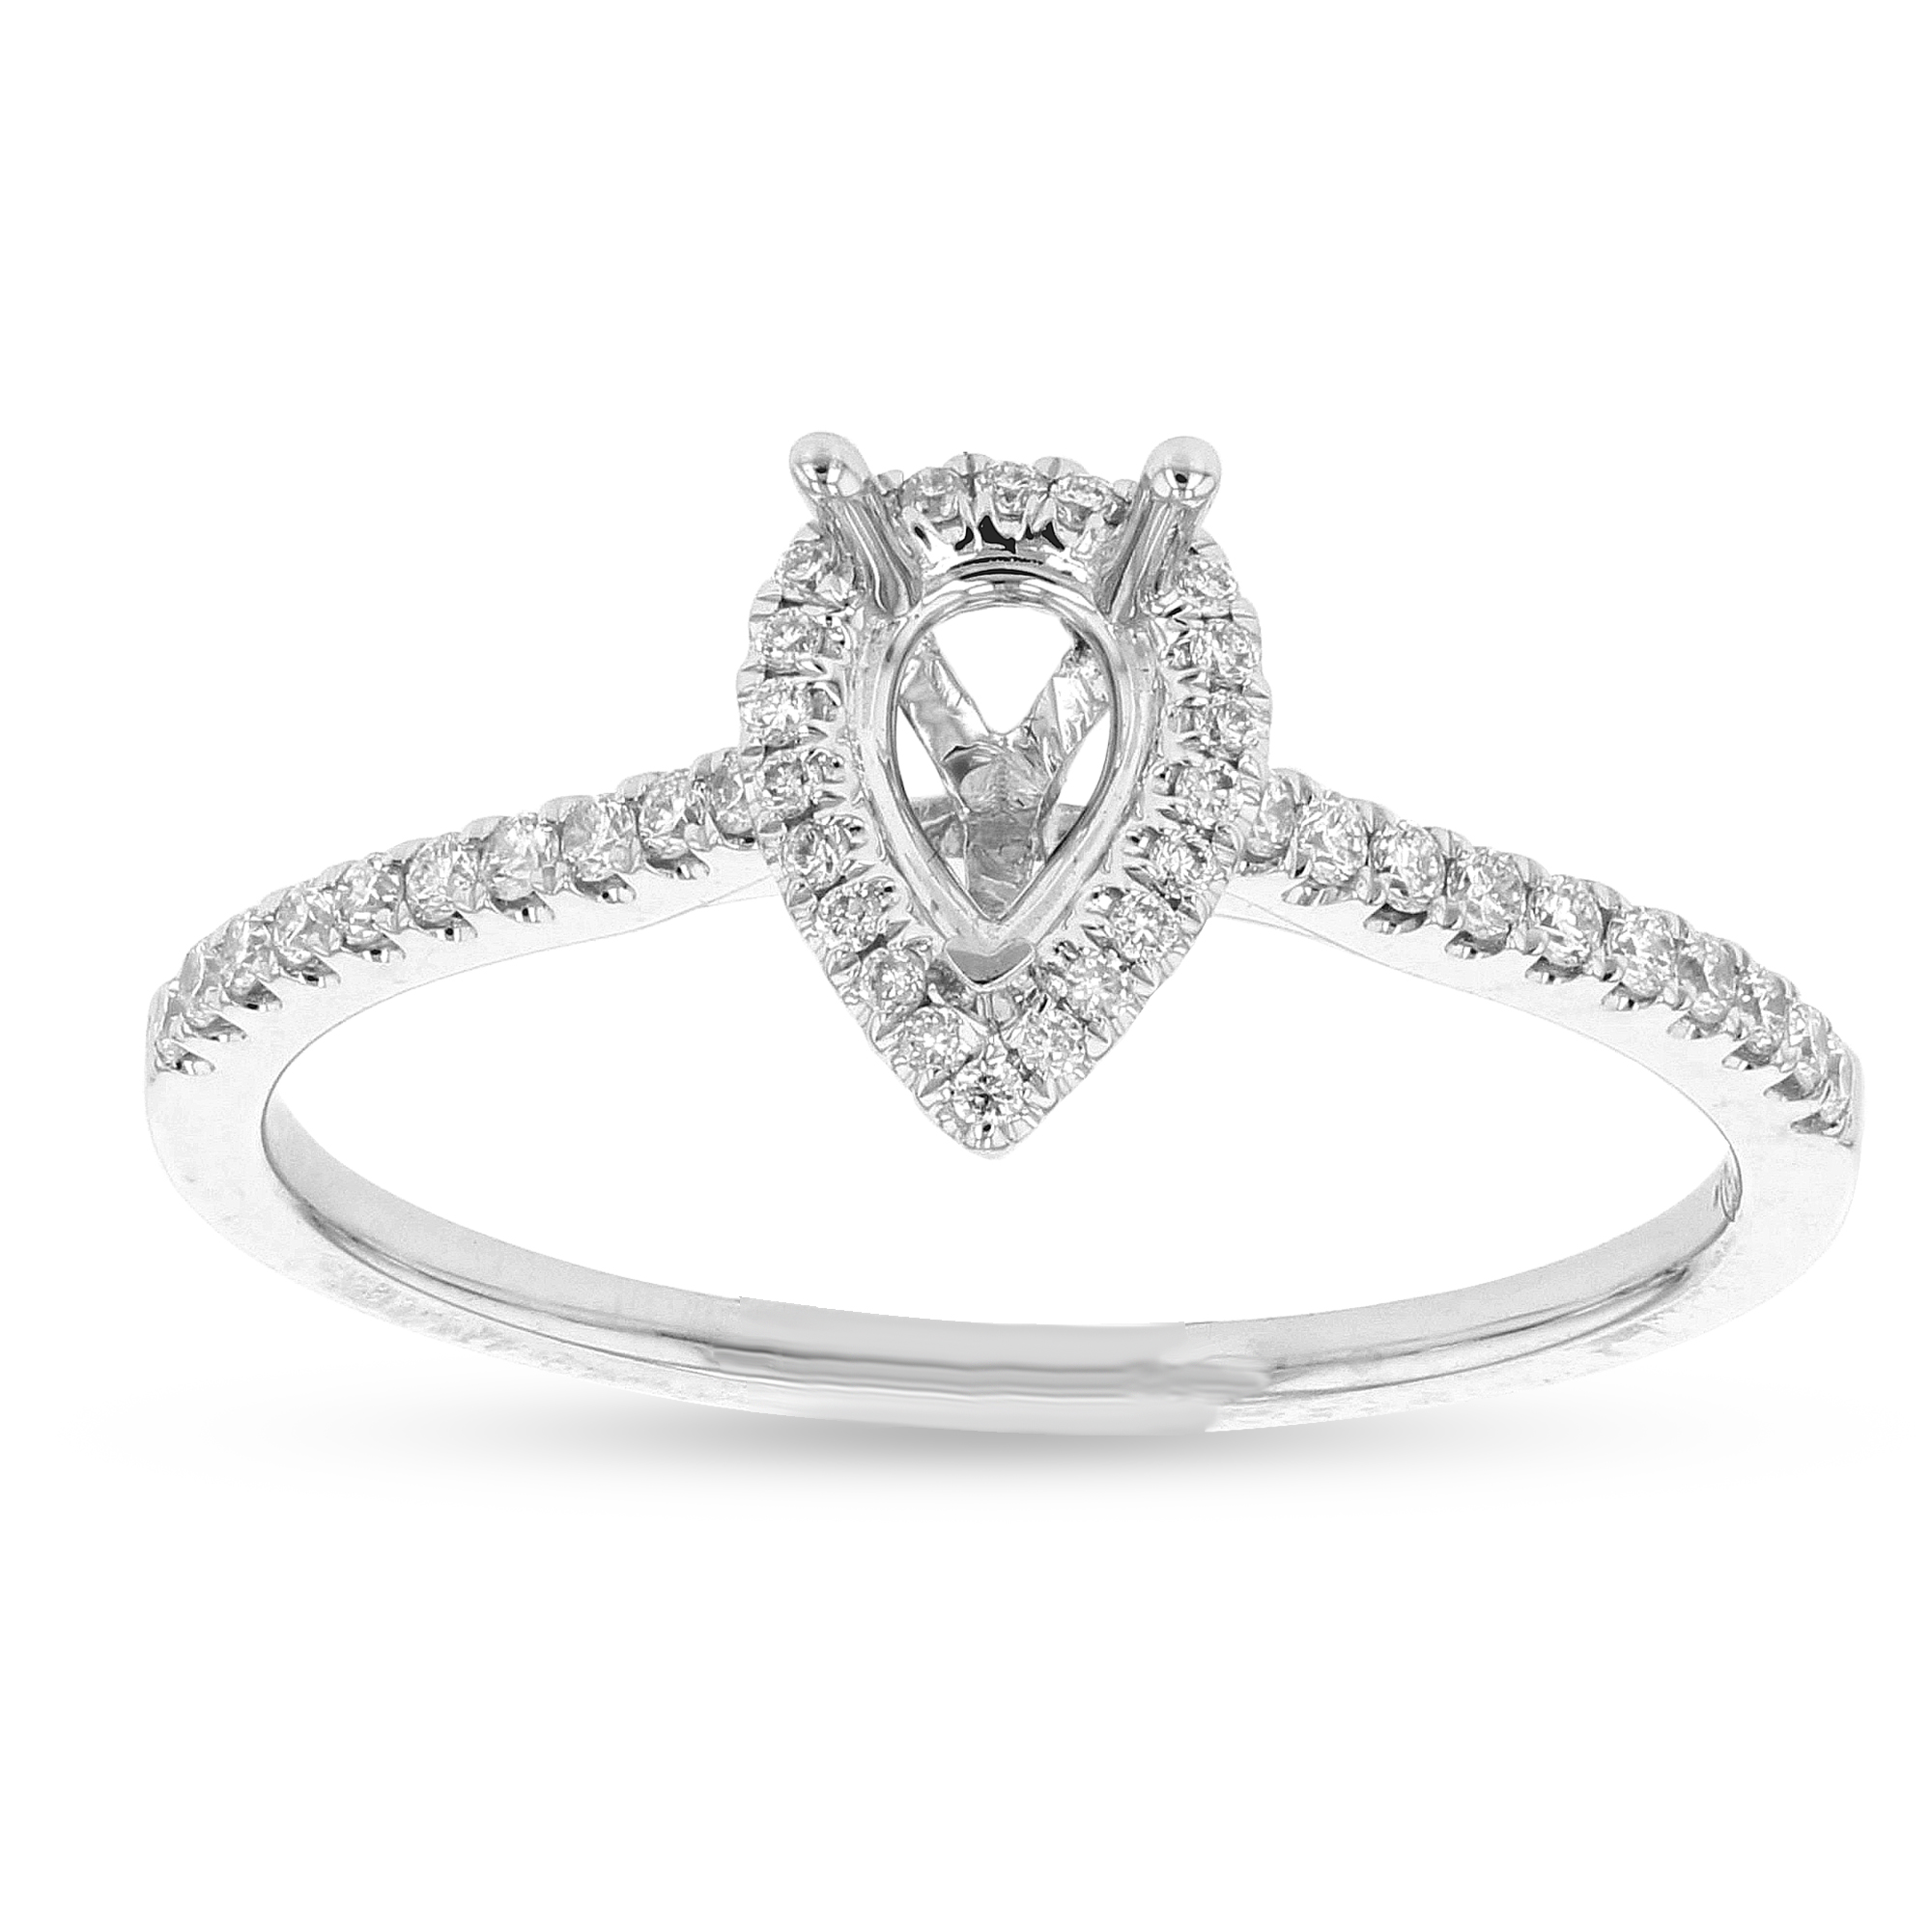 View 0.19ctw Diamond Pear Shaped Semi Mount in 18k White Gold